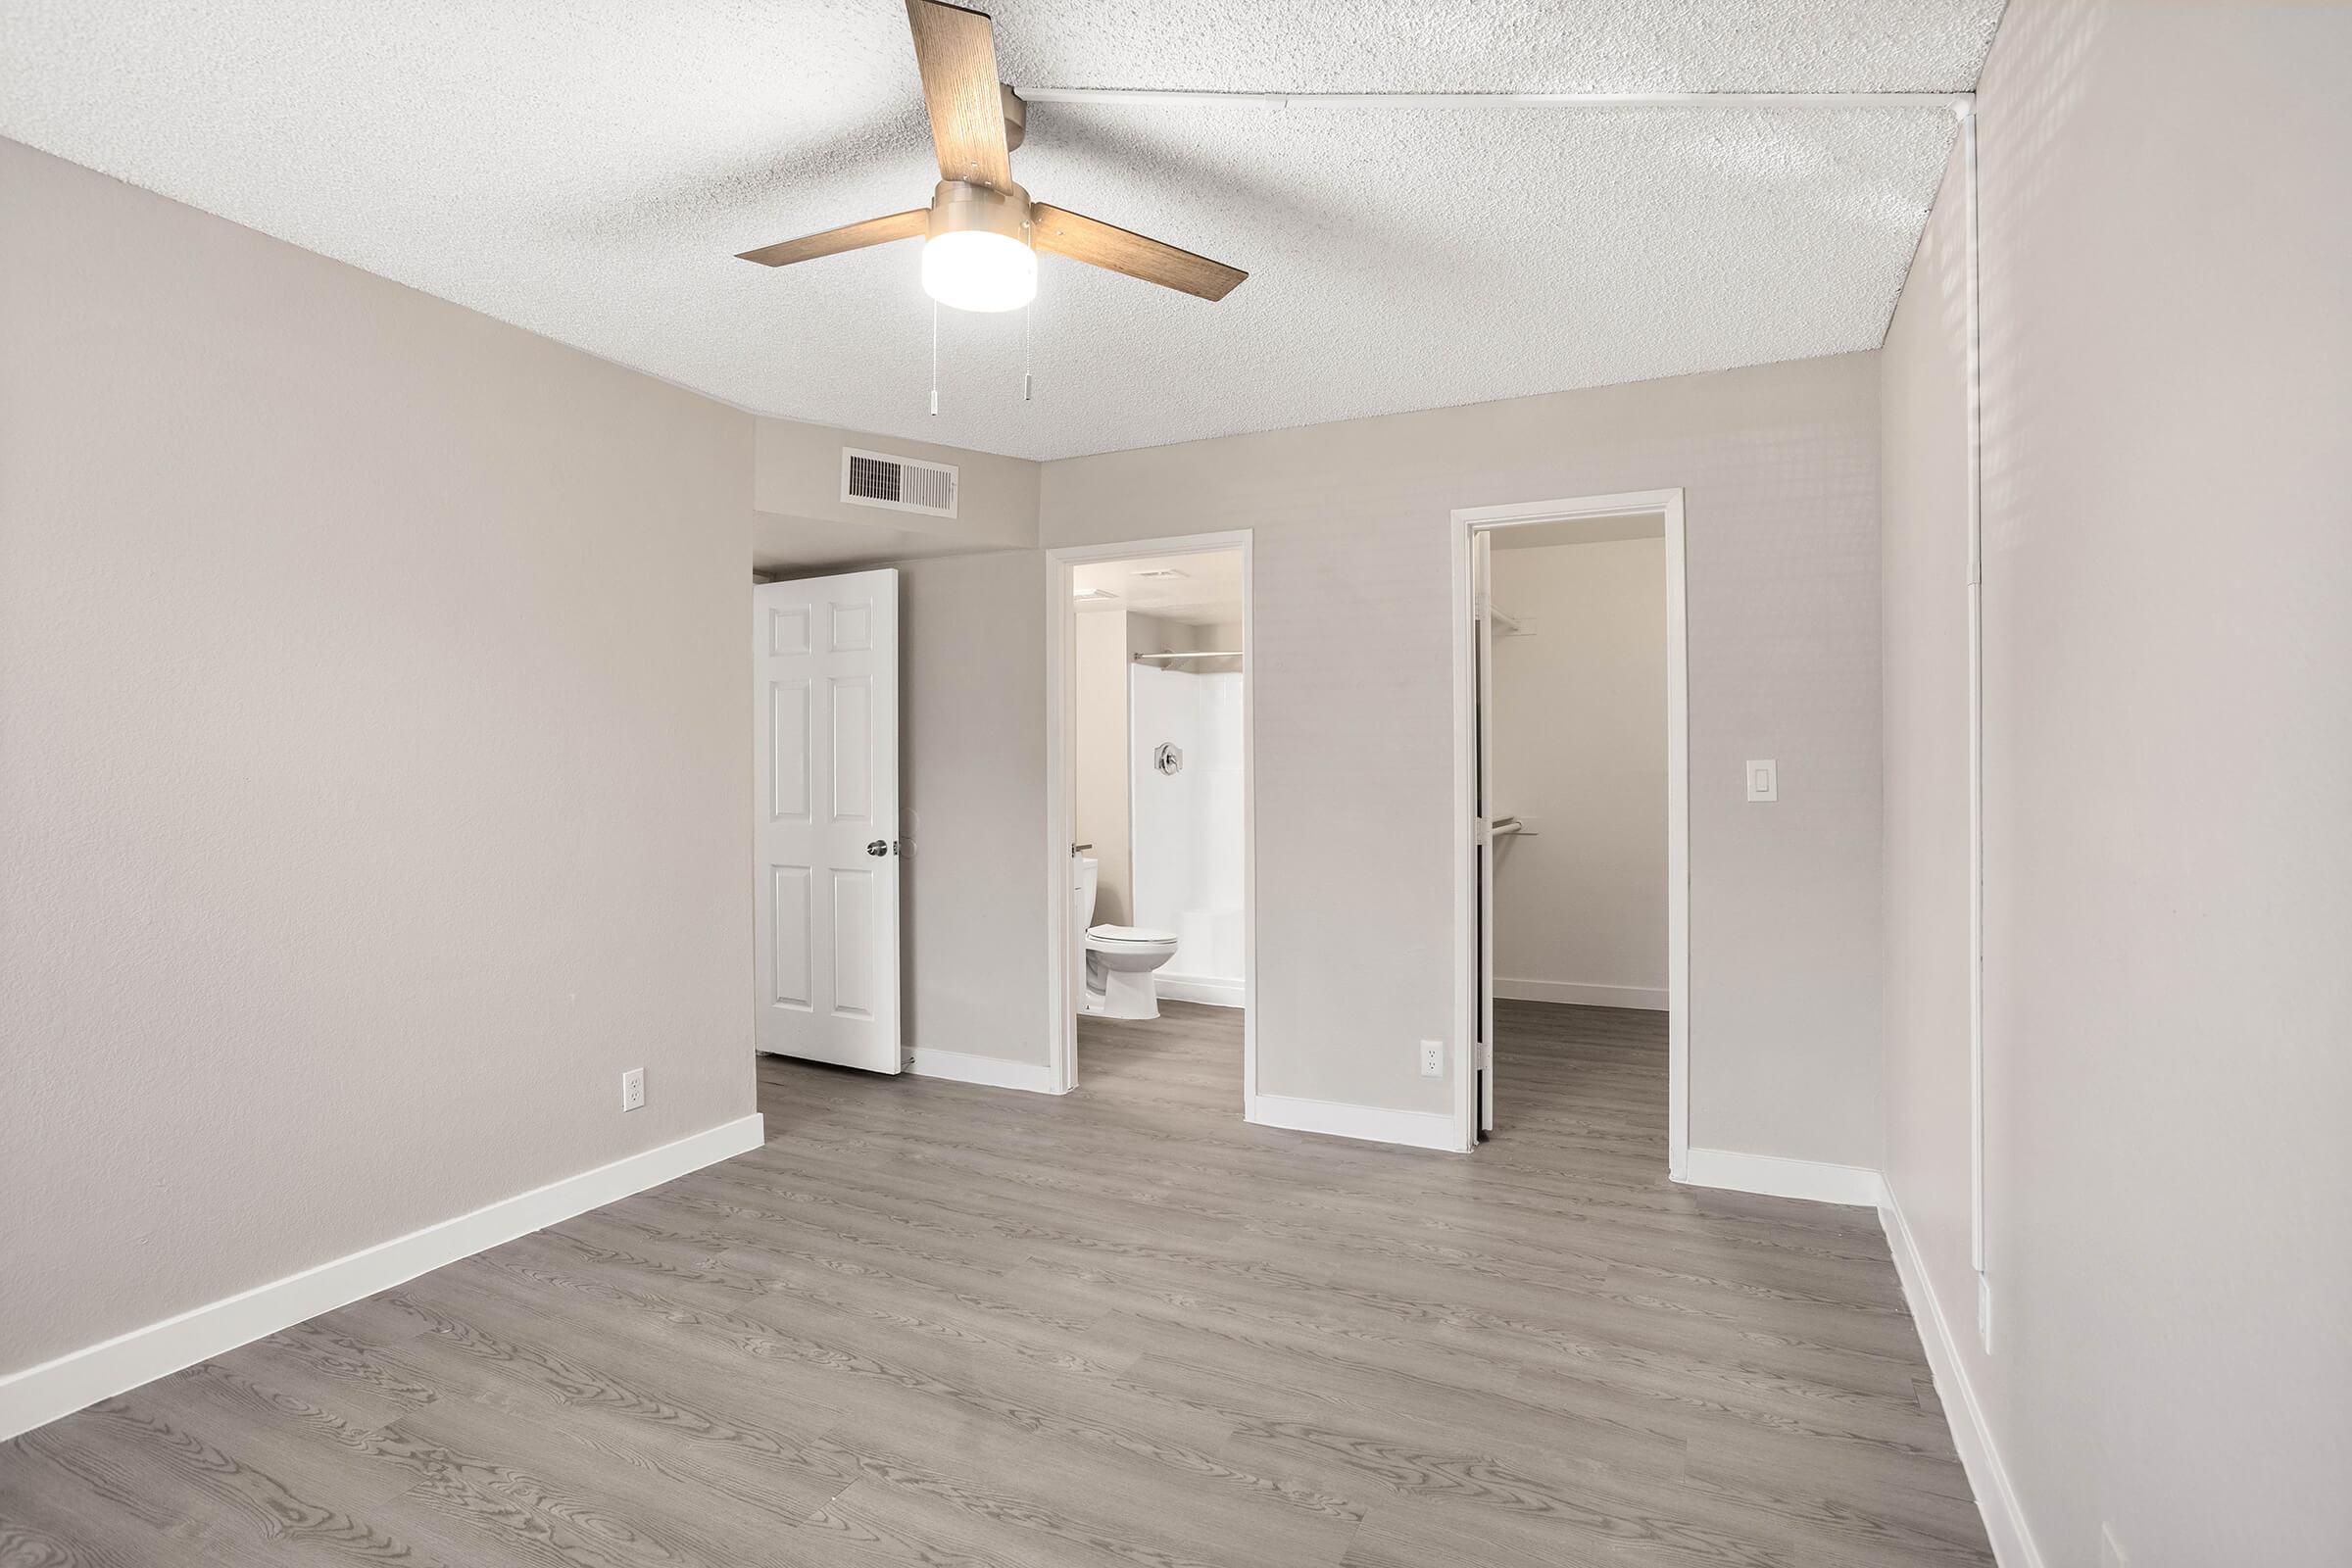 Open bright bedroom with ceiling fan, walk in closet, and attached bathroom